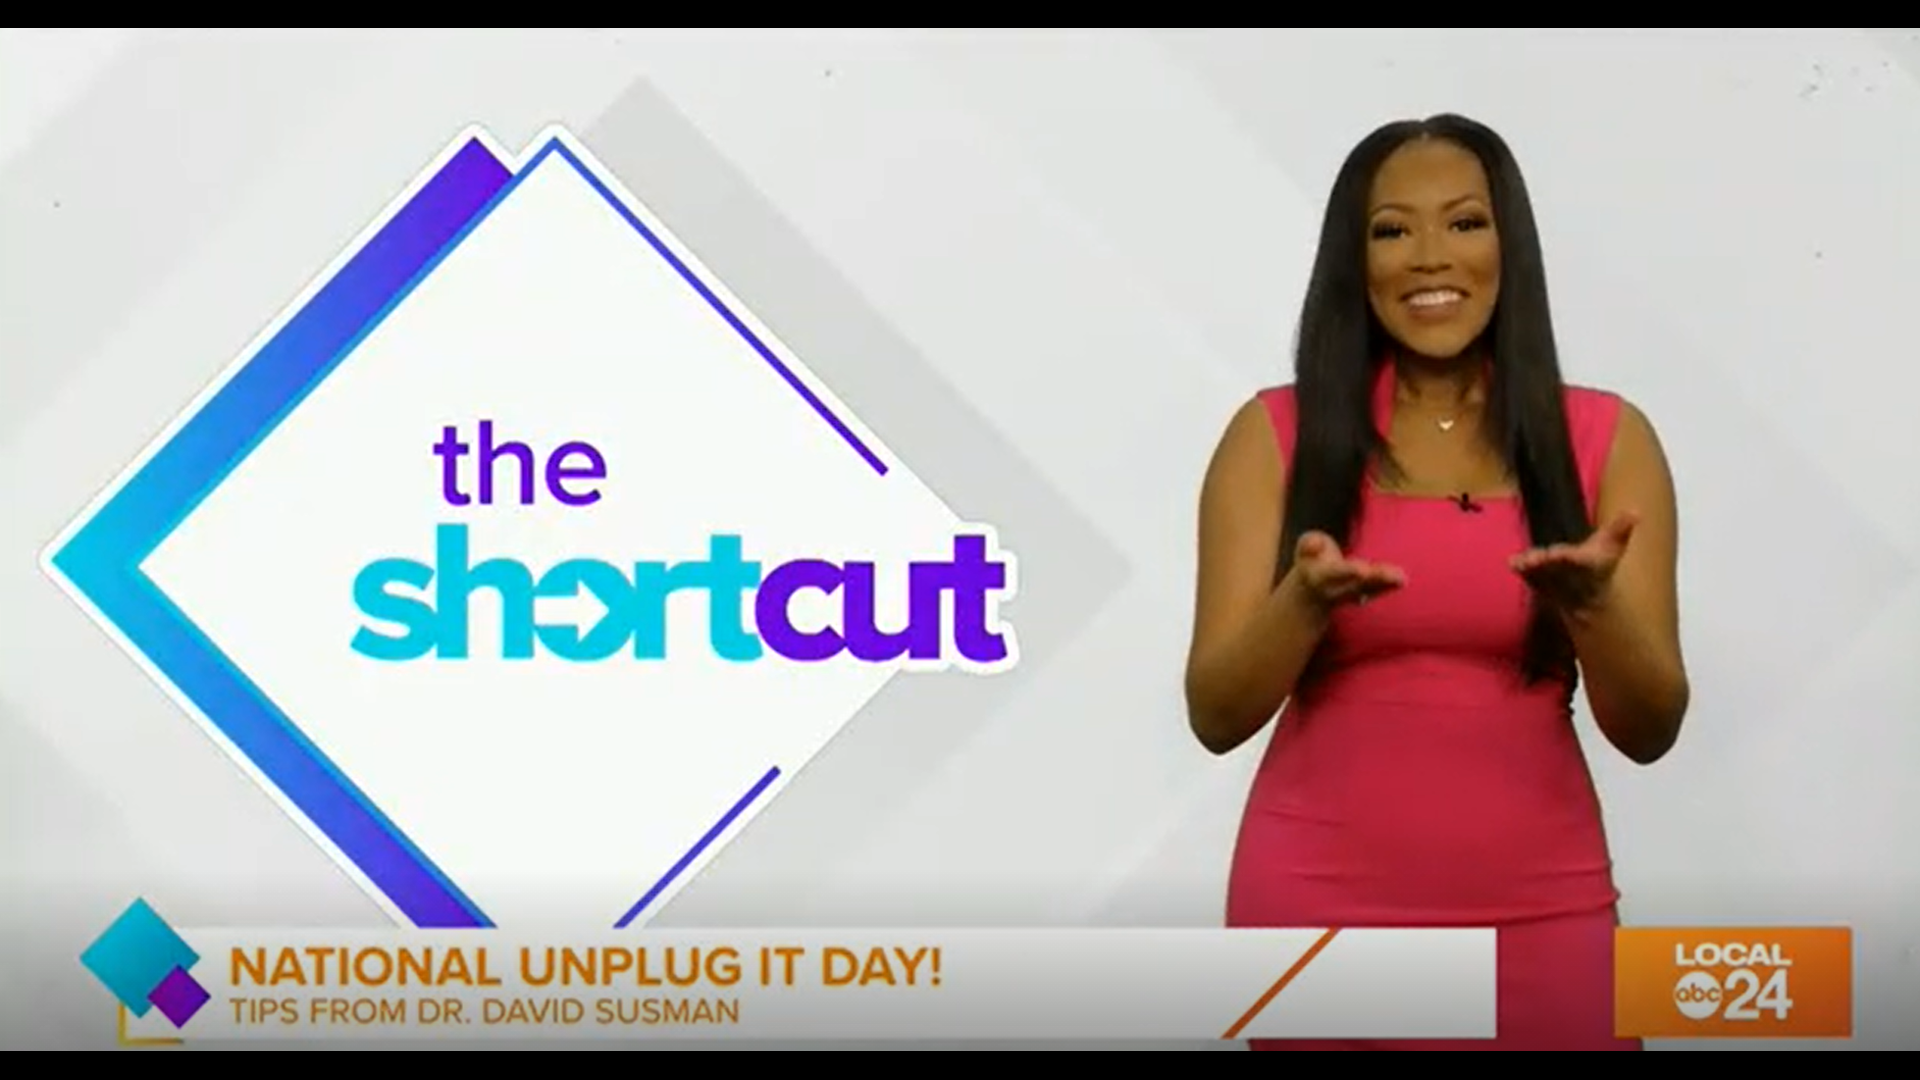 Join Sydney Neely on "The Shortcut" for tips and tricks on how to keep yourself healthy and occupied WITHOUT having to reach your electronics!